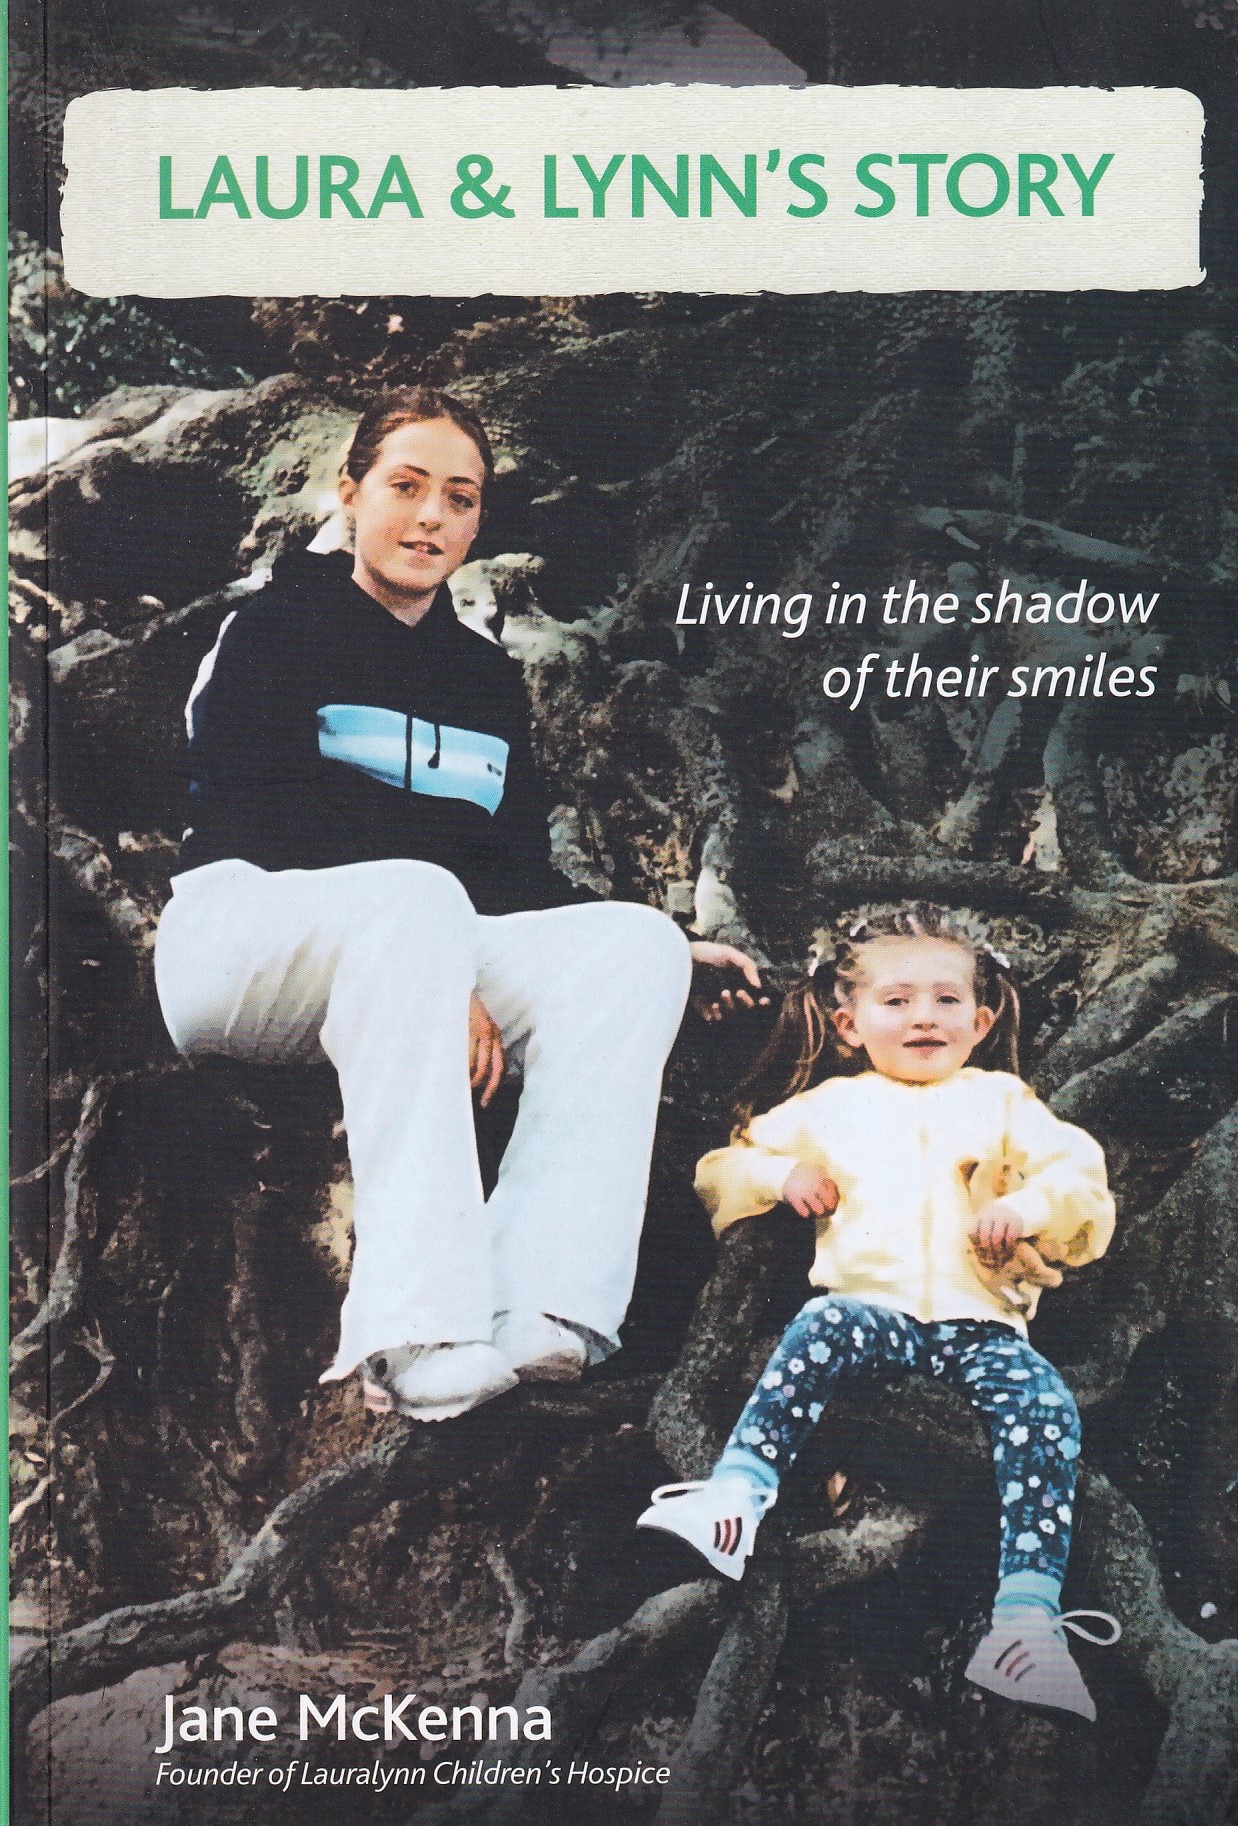 Laura and Lynn’s Story: Living in the Shadow of Their Smiles by Jane McKenna